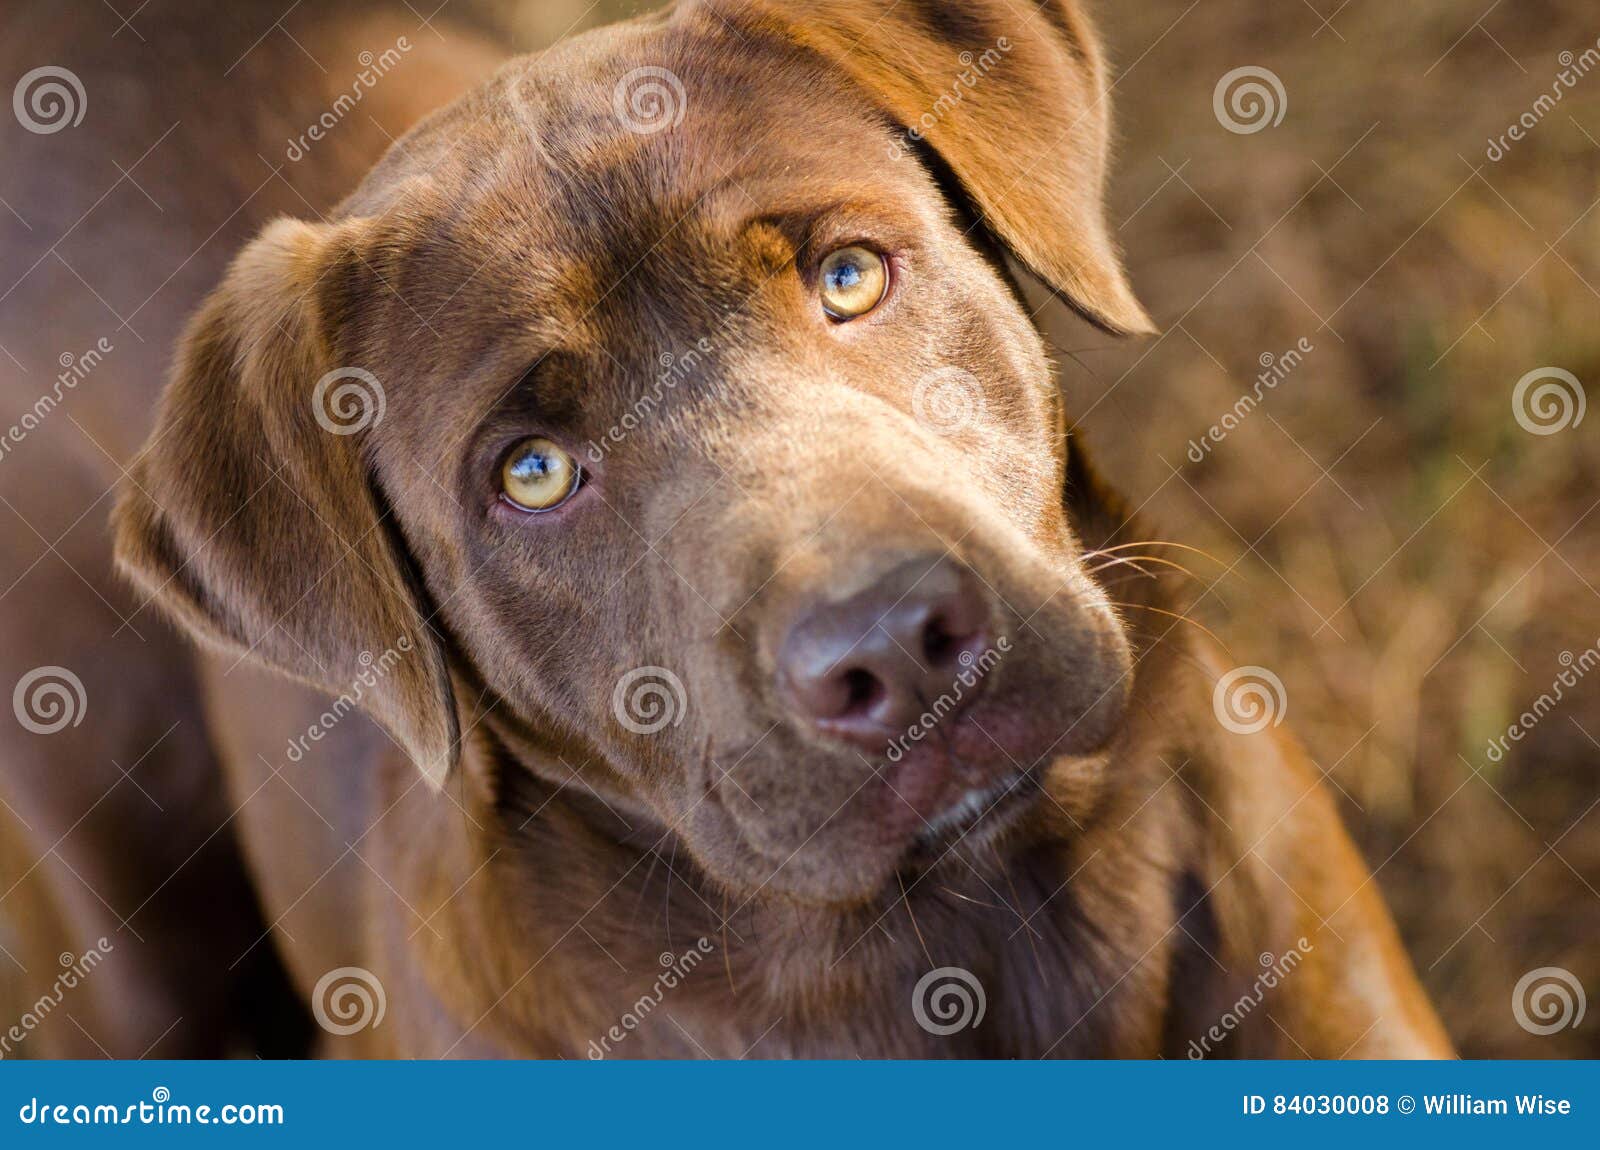 Chocolate Retriever Mix Dog Stock Photo - Image of great, outdoor: 84030008